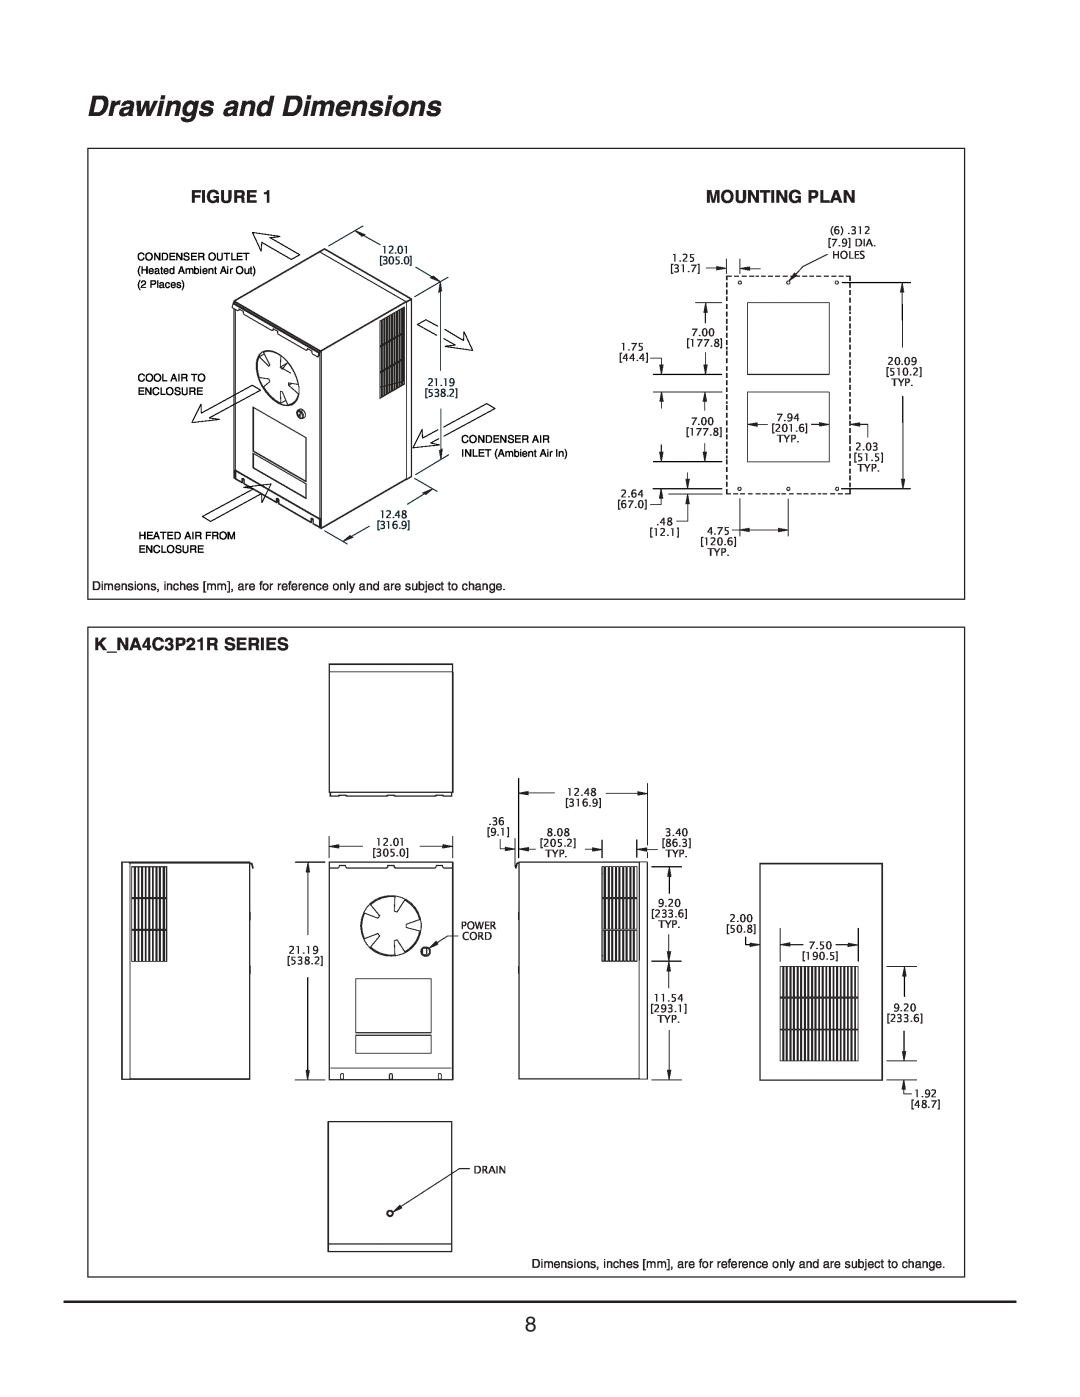 Event electronic K_NA4C3P21R manual Drawings and Dimensions, Mounting Plan, K NA4C3P21R SERIES 